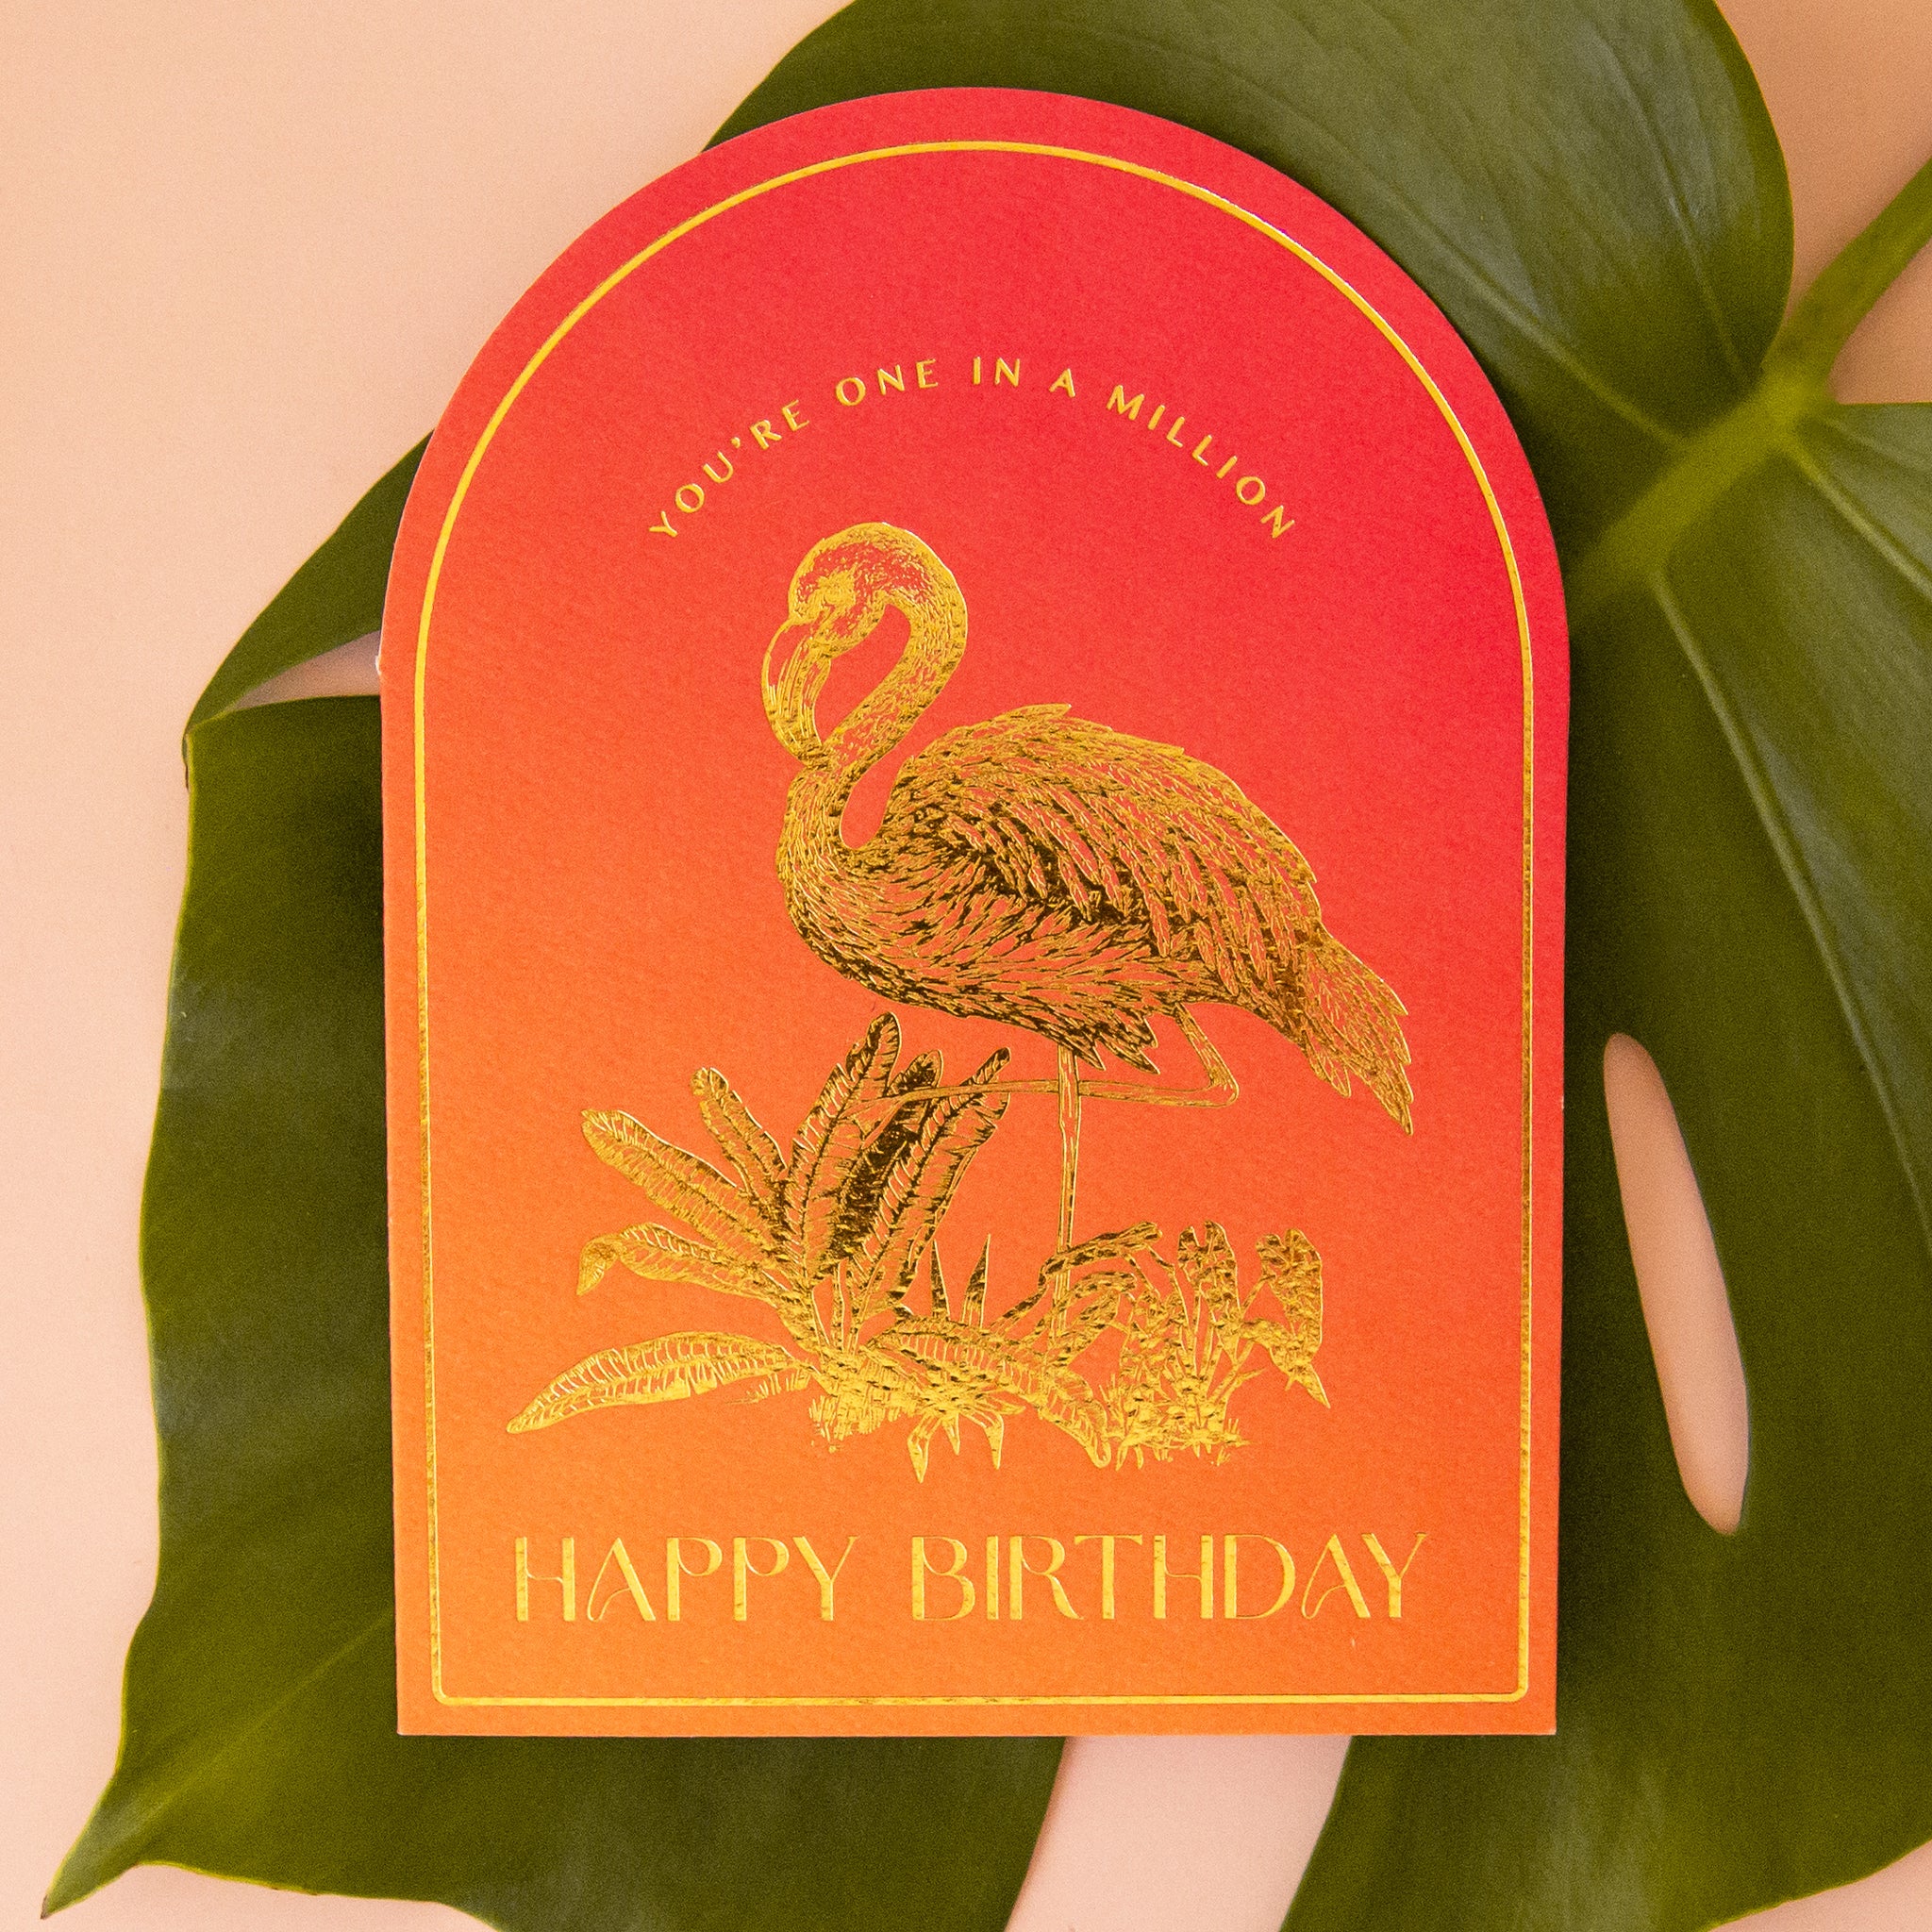 An orange gradient arched shaped card with gold foiled illustrations of a flamingo and text that reads, "You're One In A Million Happy Birthday". 